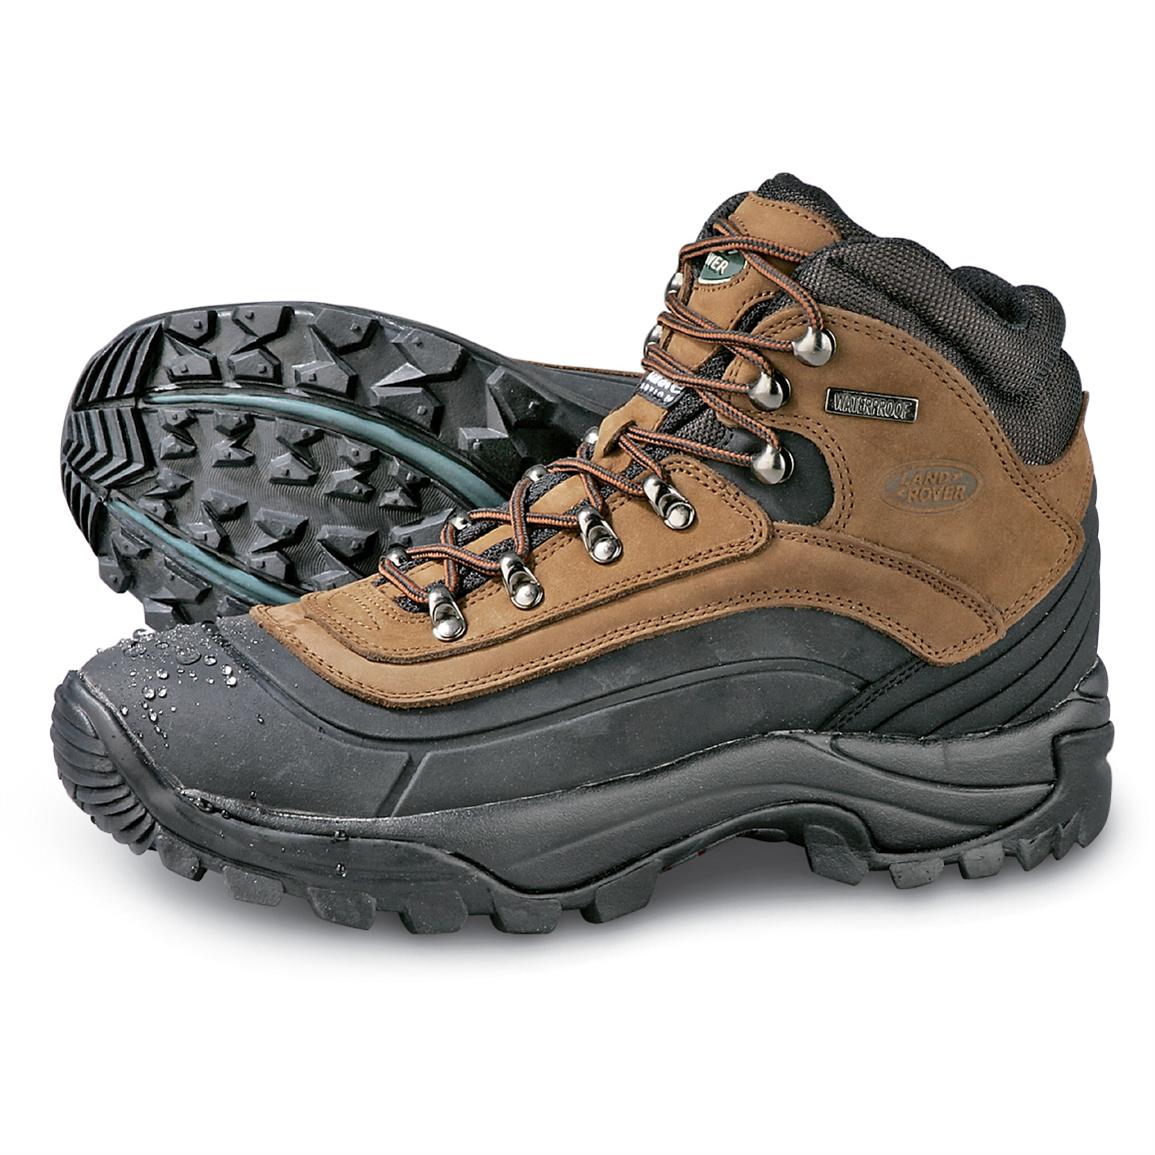 Men's Land Rover® Discovery Hikers, Brown 91569, Hiking